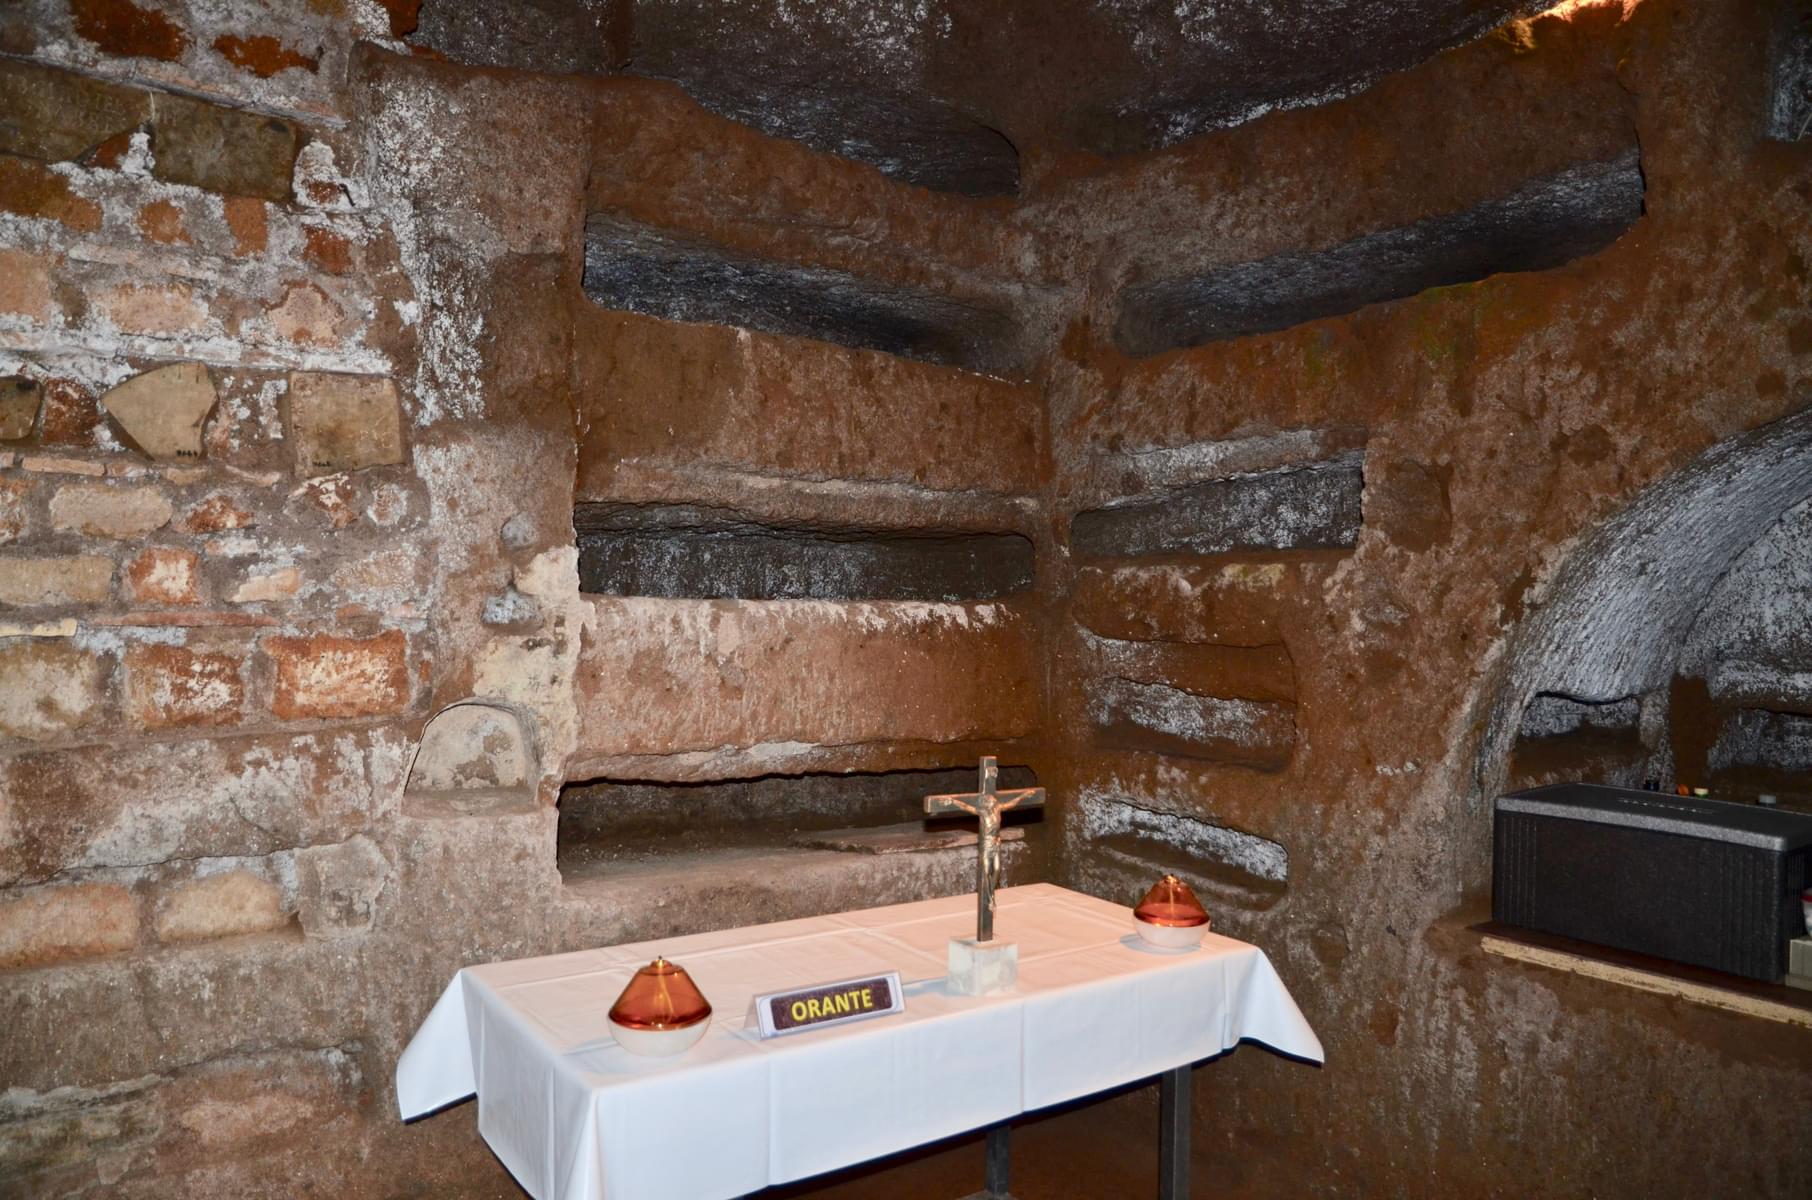 Discover the Roman catacombs